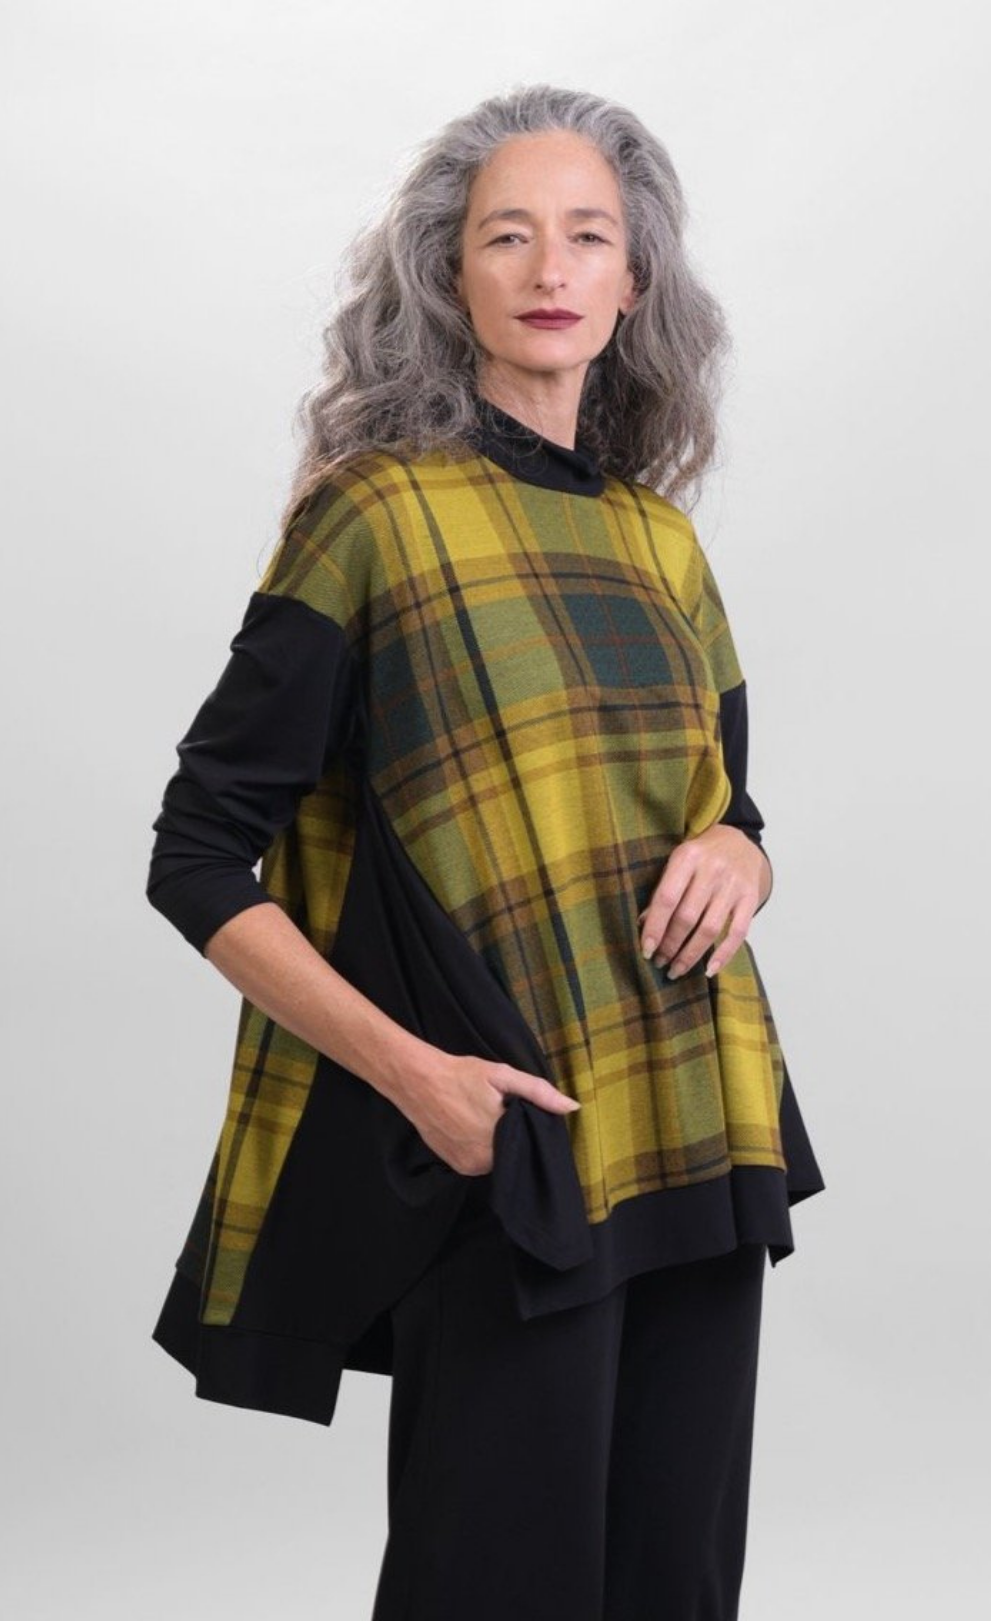 Front top half view of a woman wearing black pants and the alembika plaid trapeze top. This top is a yellow and green plaid with solid black drop shoulder sleeves. The top has a funnel neck, side slits, and black detailing around the hem